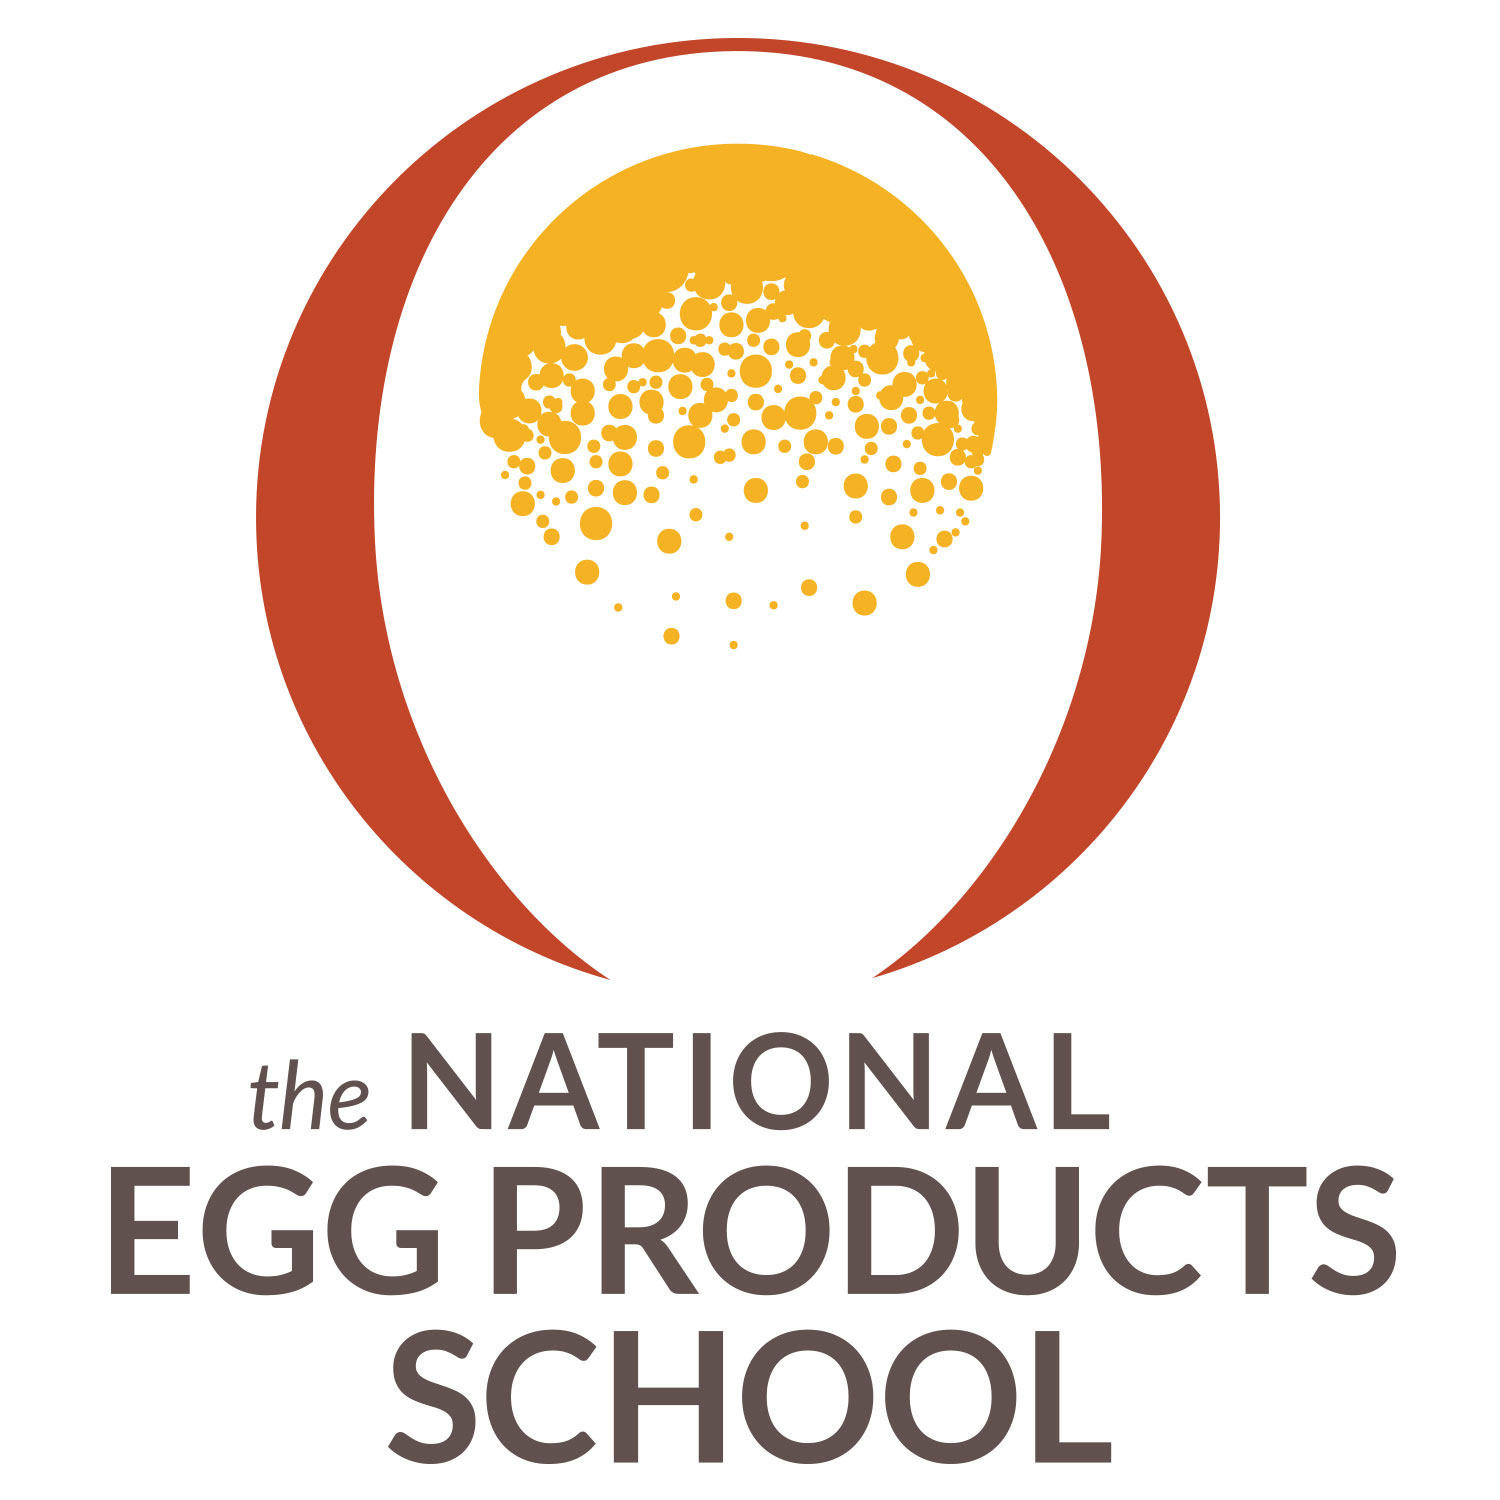 The National Egg Products School logo